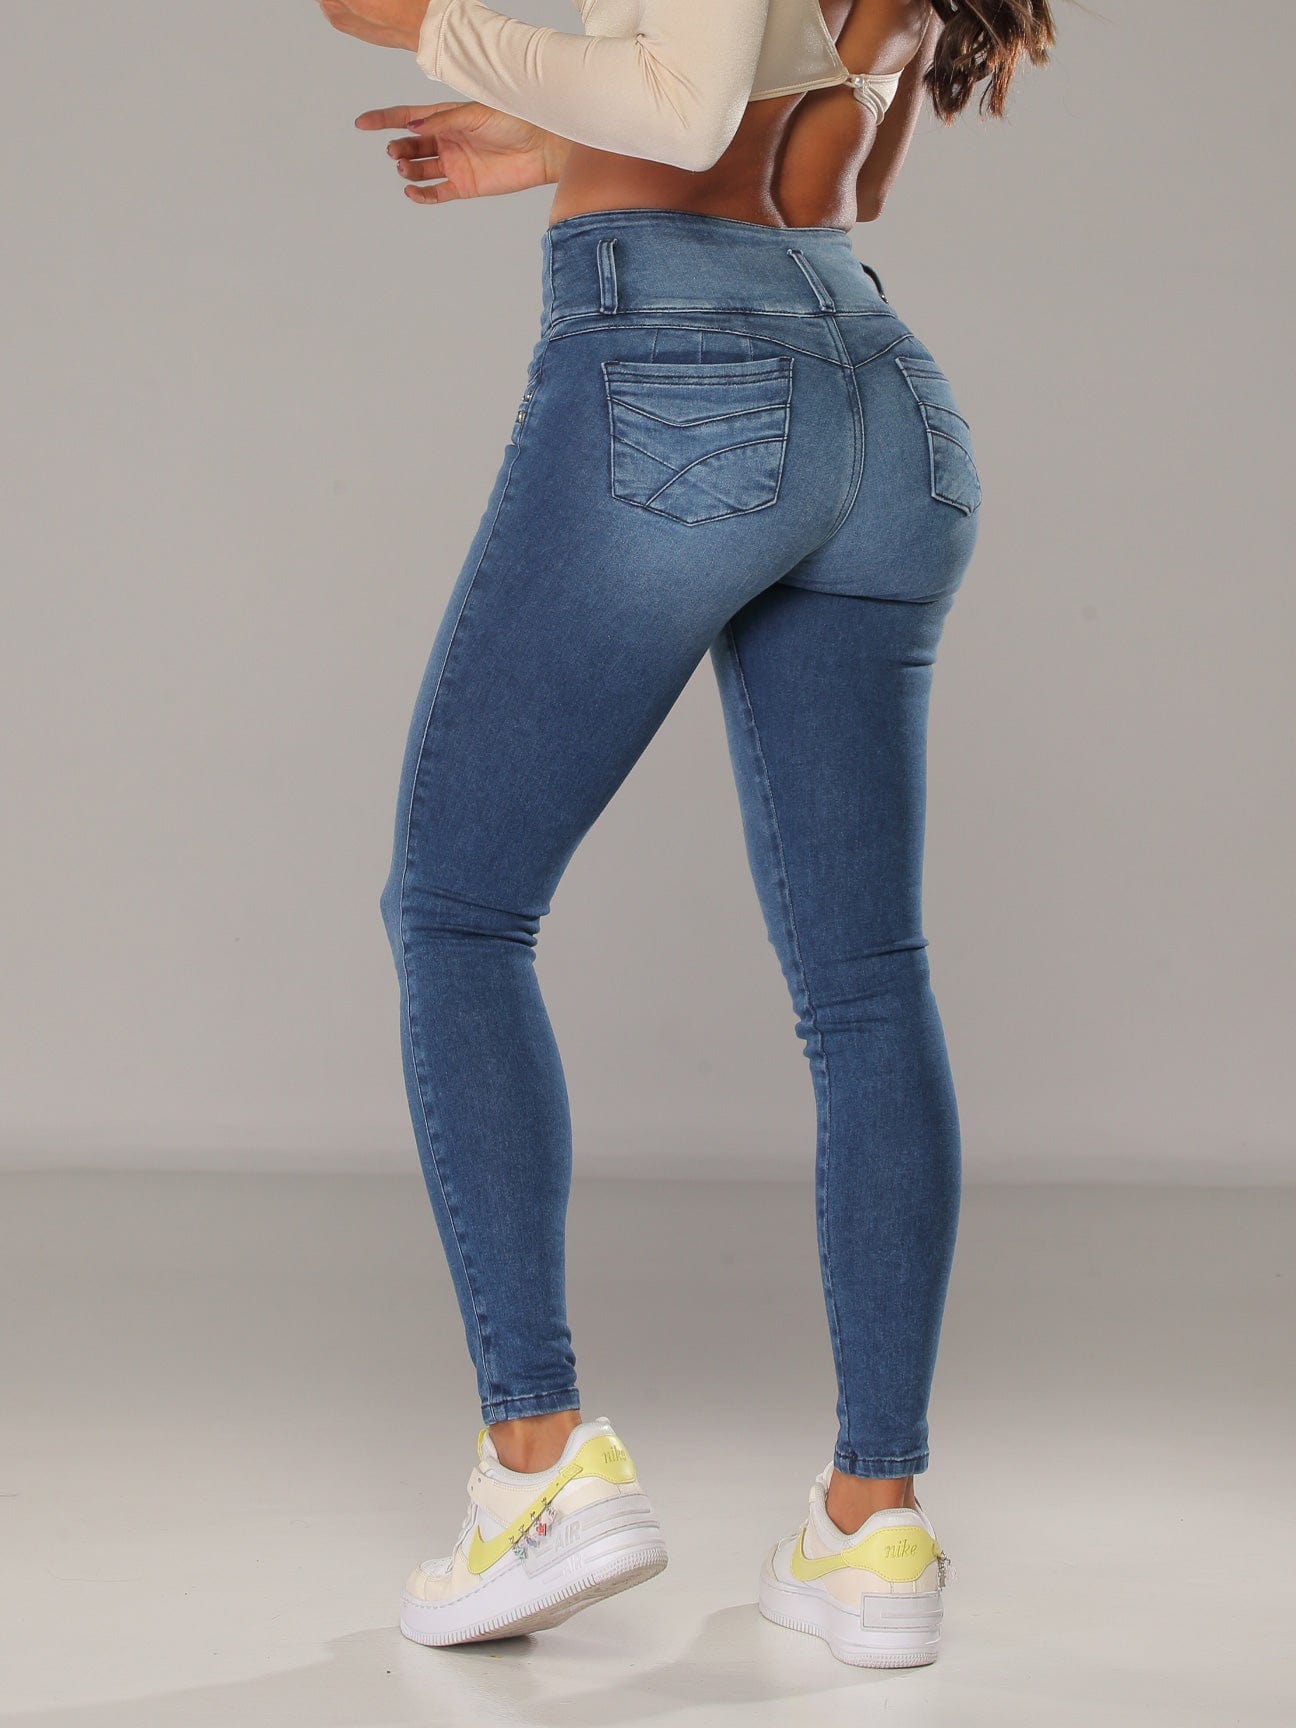 Jeans Colombian Levanta Cola Butt Lift Skinny Push Up Slimming Sexy Blue  Streth